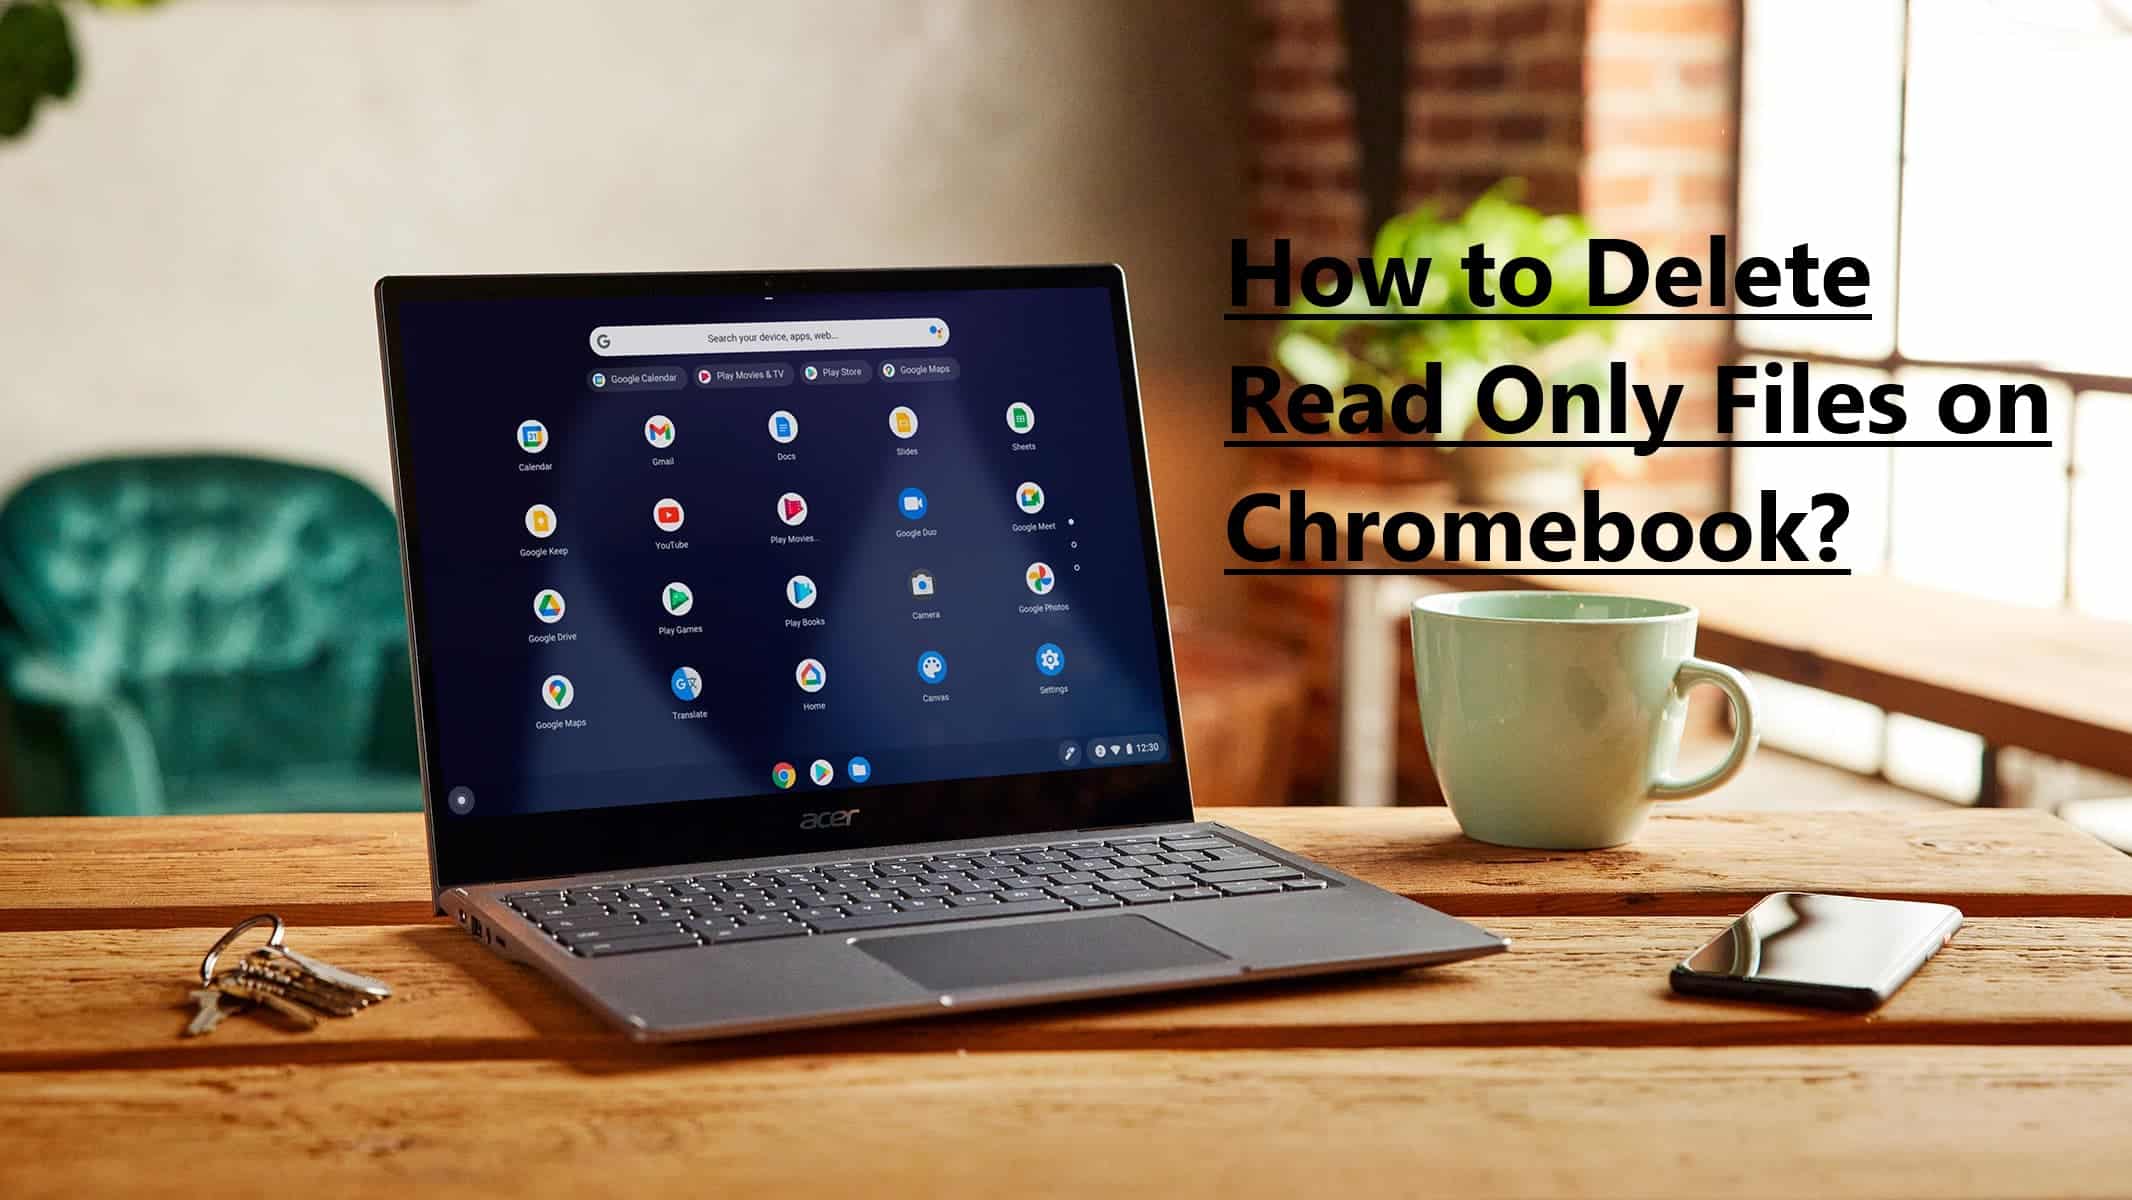 How to Delete Read Only Files on Chromebook